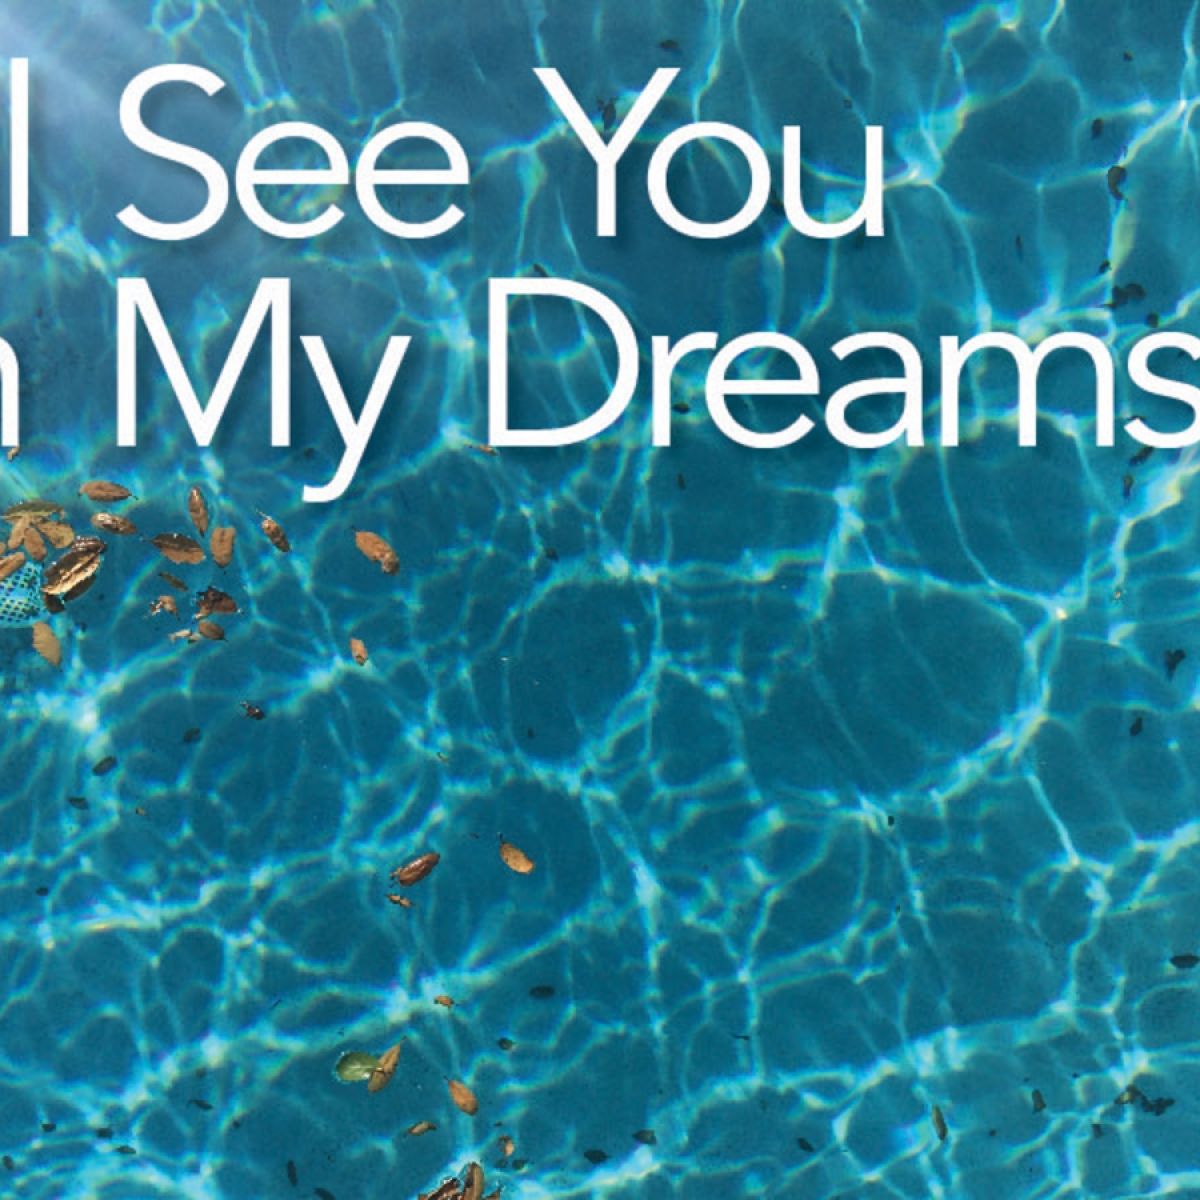 Movie Review: I'll See You In My Dreams